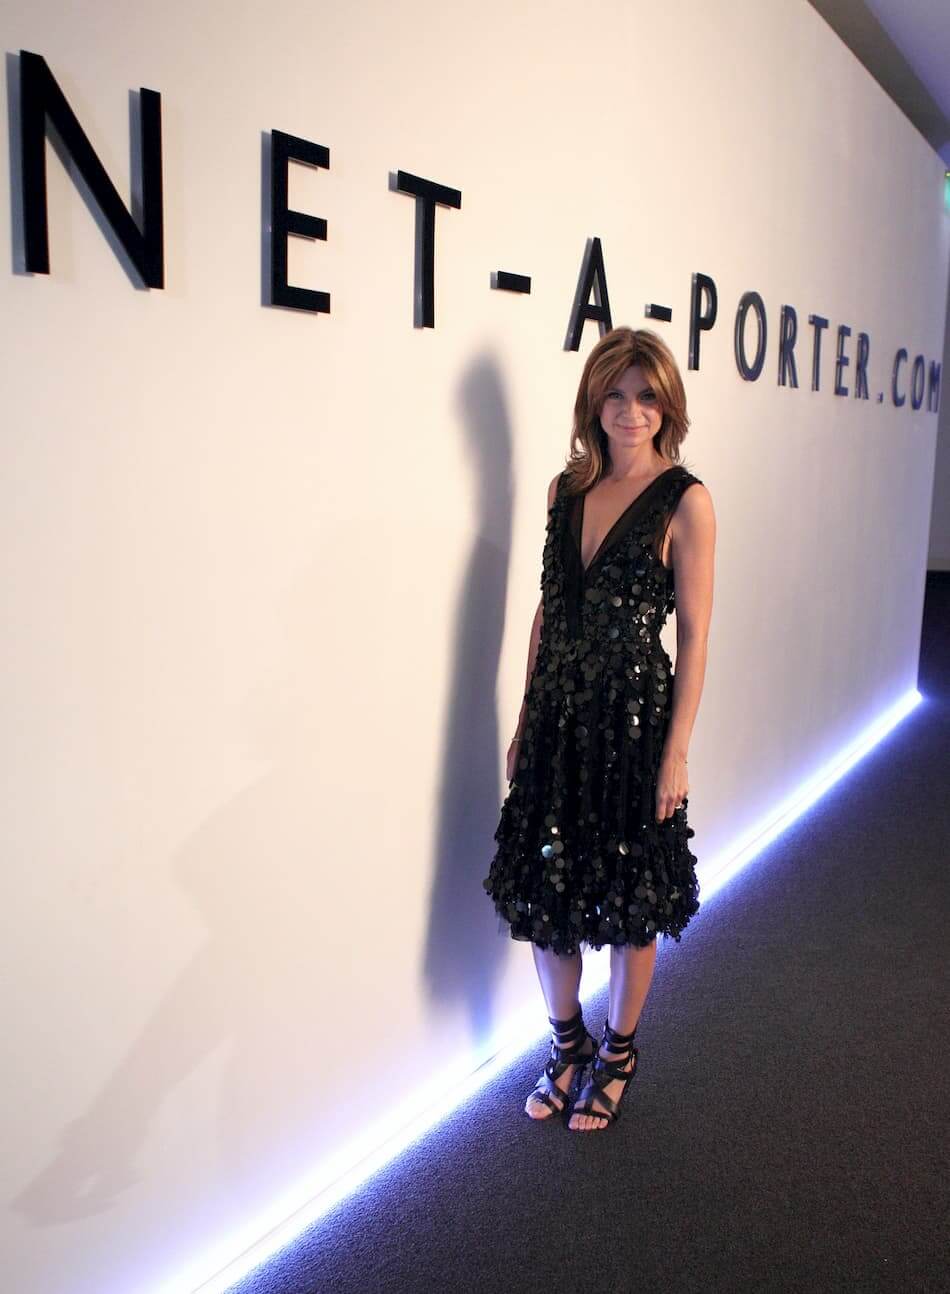 Natalie Massenet attends the 10th Birthday party for Net-A-Porter at Westfield on July 7, 2010 in London, England.